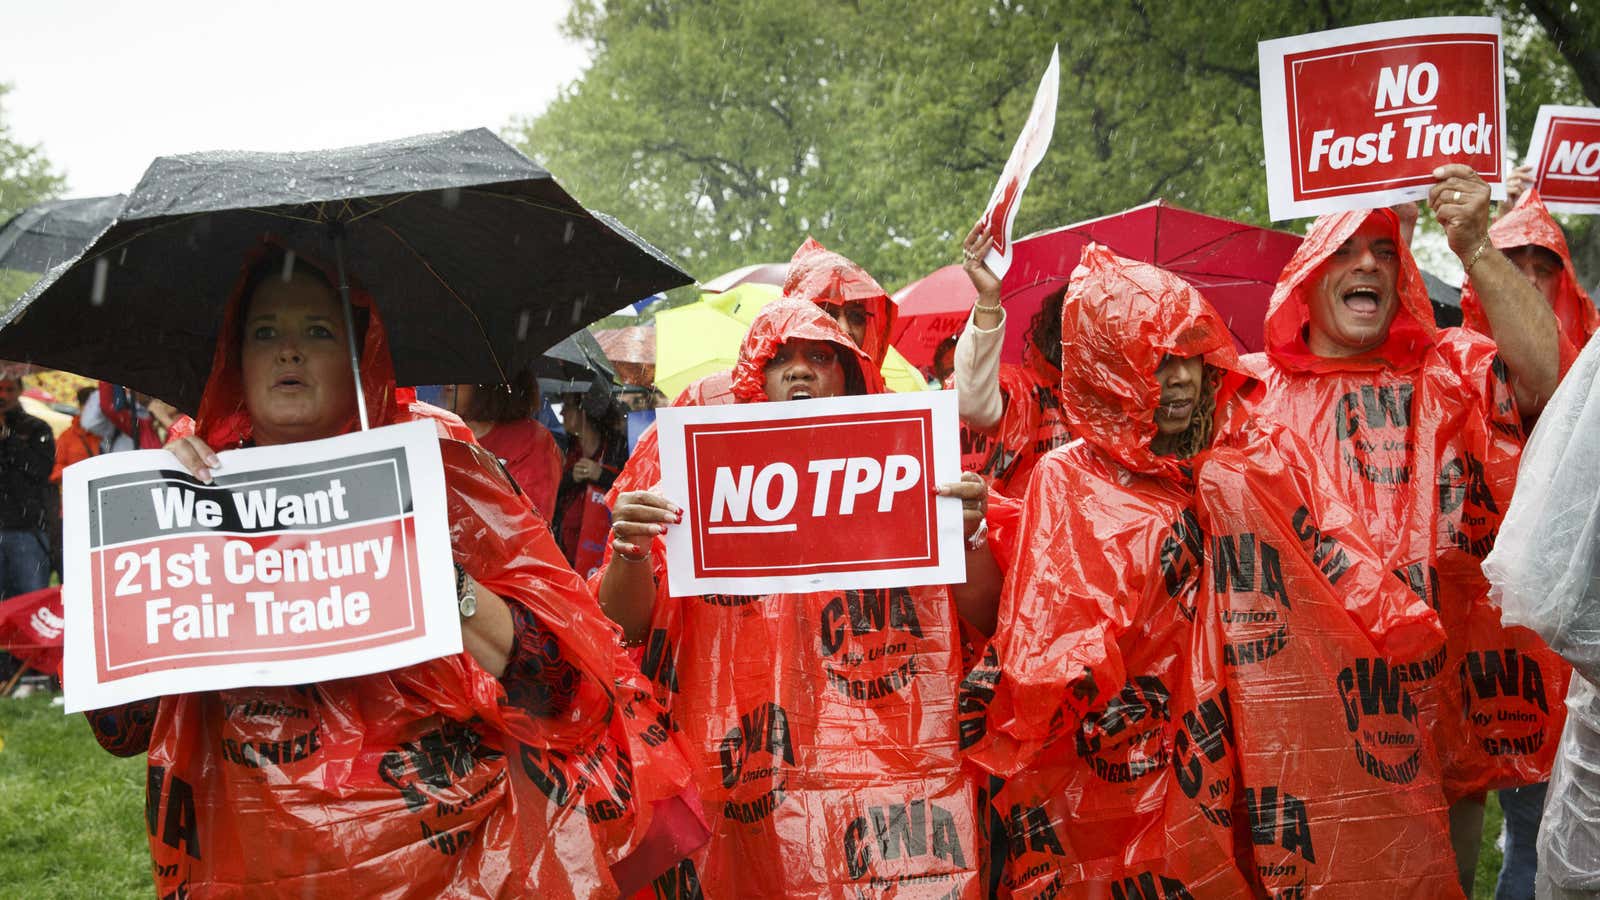 Demonstrators opposed to the TPP rally for fair trade at the Capitol in Washington, DC.